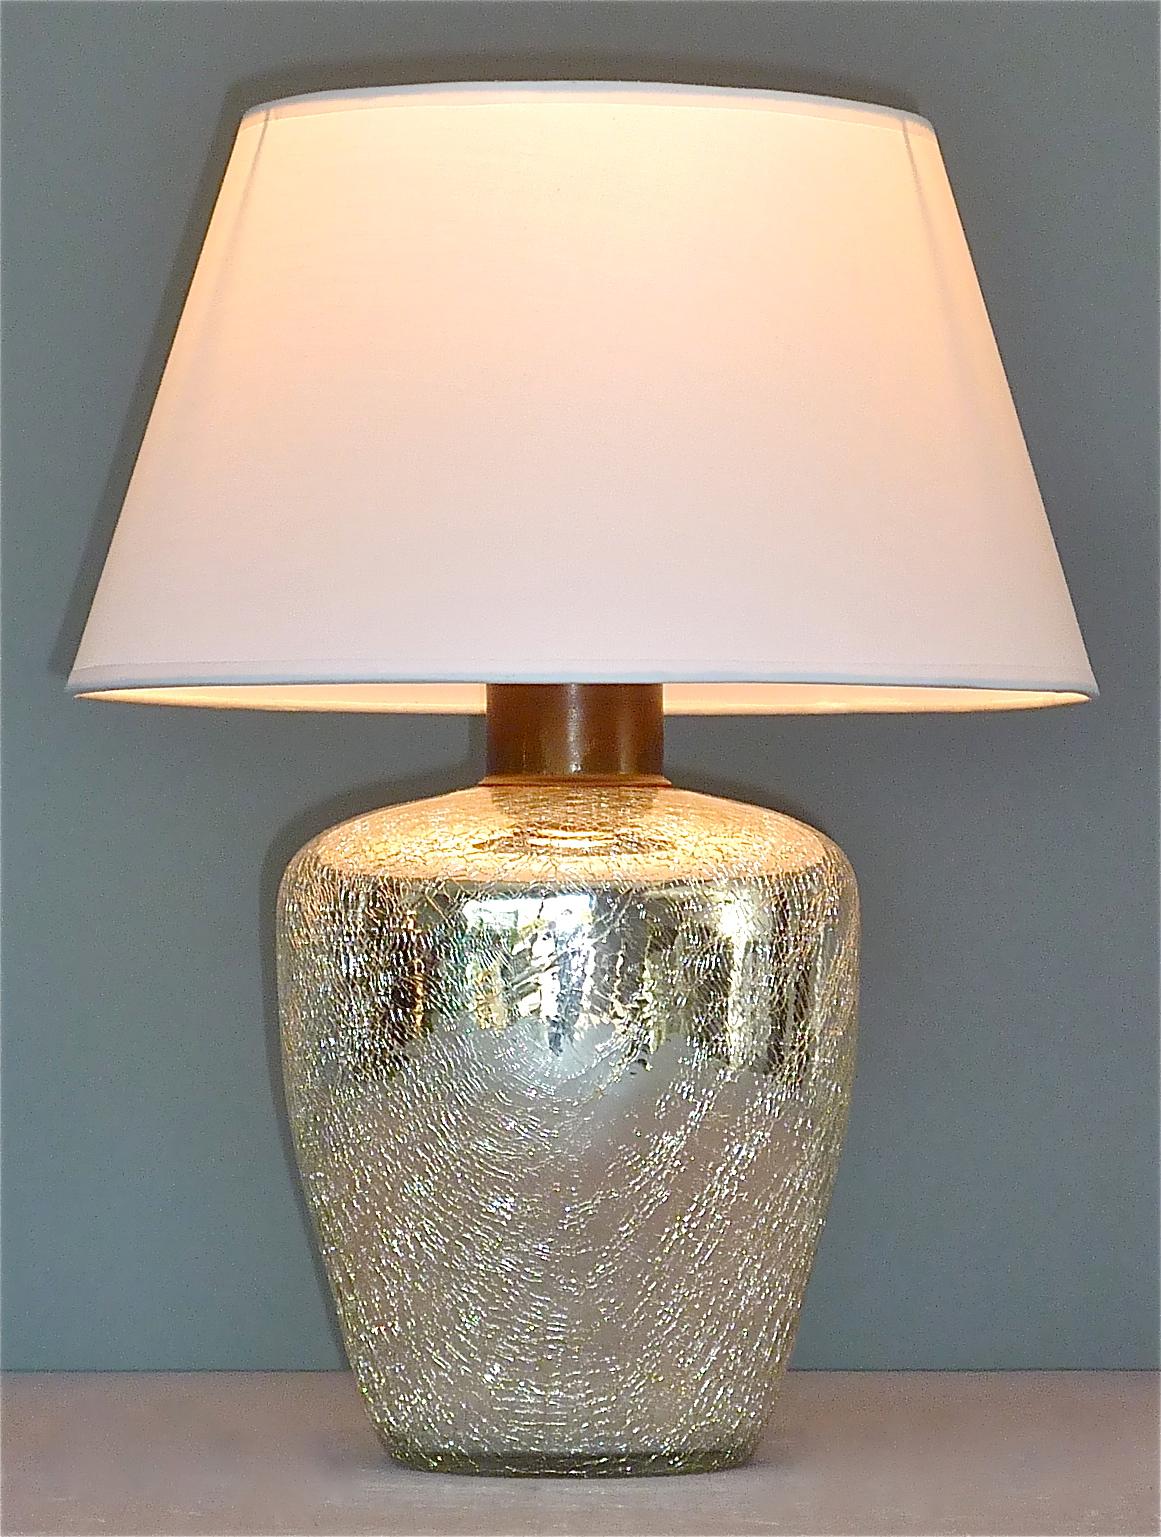 Rare Modernism Art Deco table lamp in thick silver mirrored glass with crackle effect finish which can be dated France circa 1930s. It has a patinated metal fixture with a black plastic fitting for one E 27 screw bulb to illuminate, we recommend LED